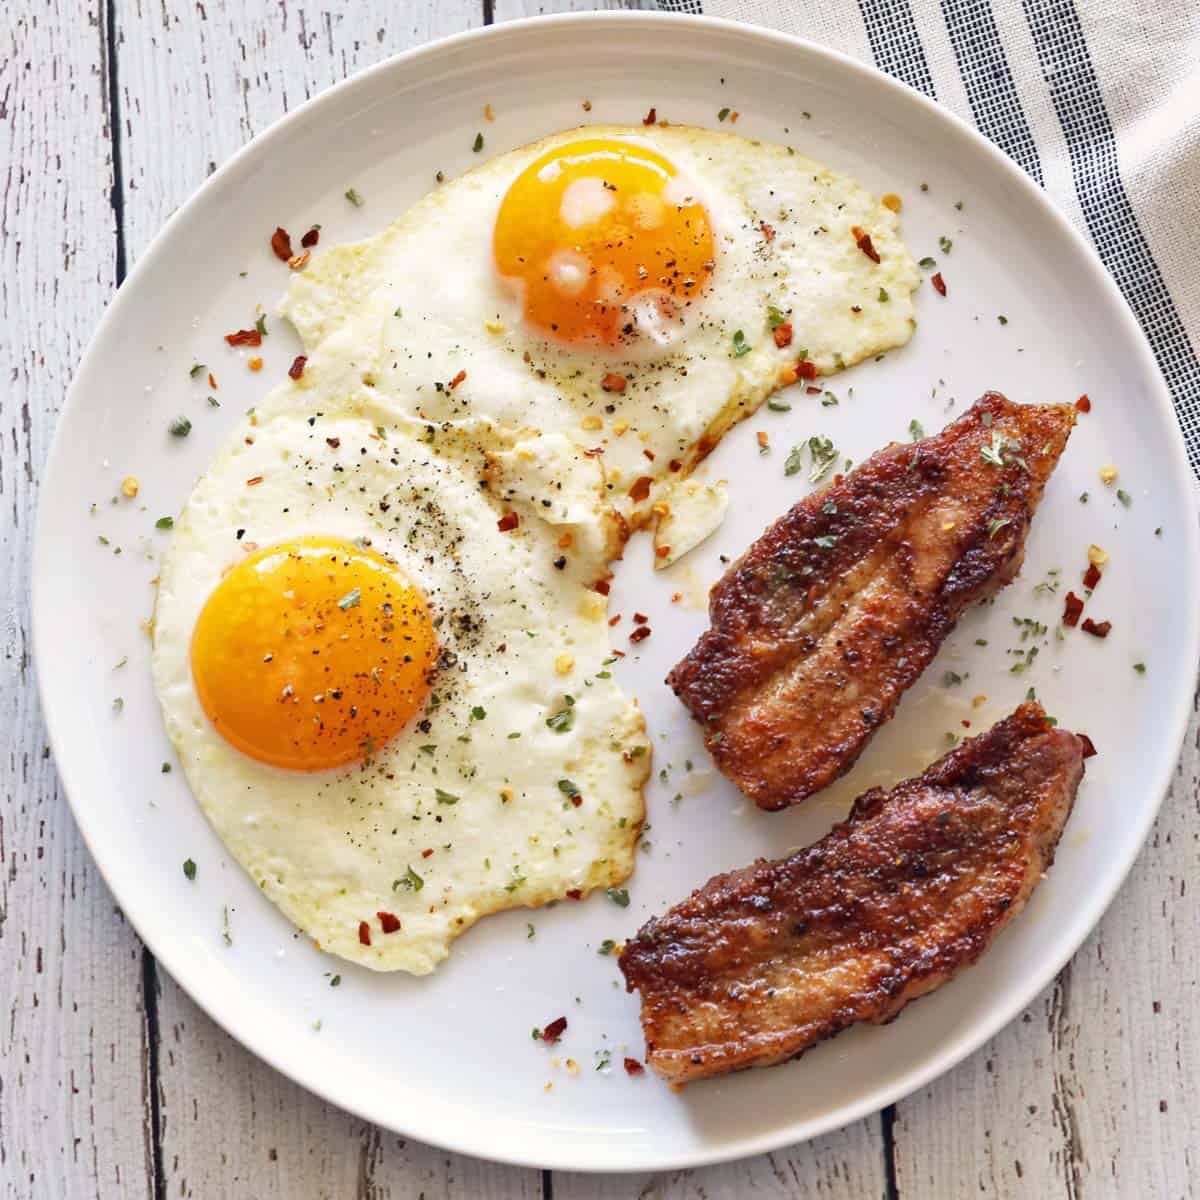 Pork belly is served with eggs for breakfast.